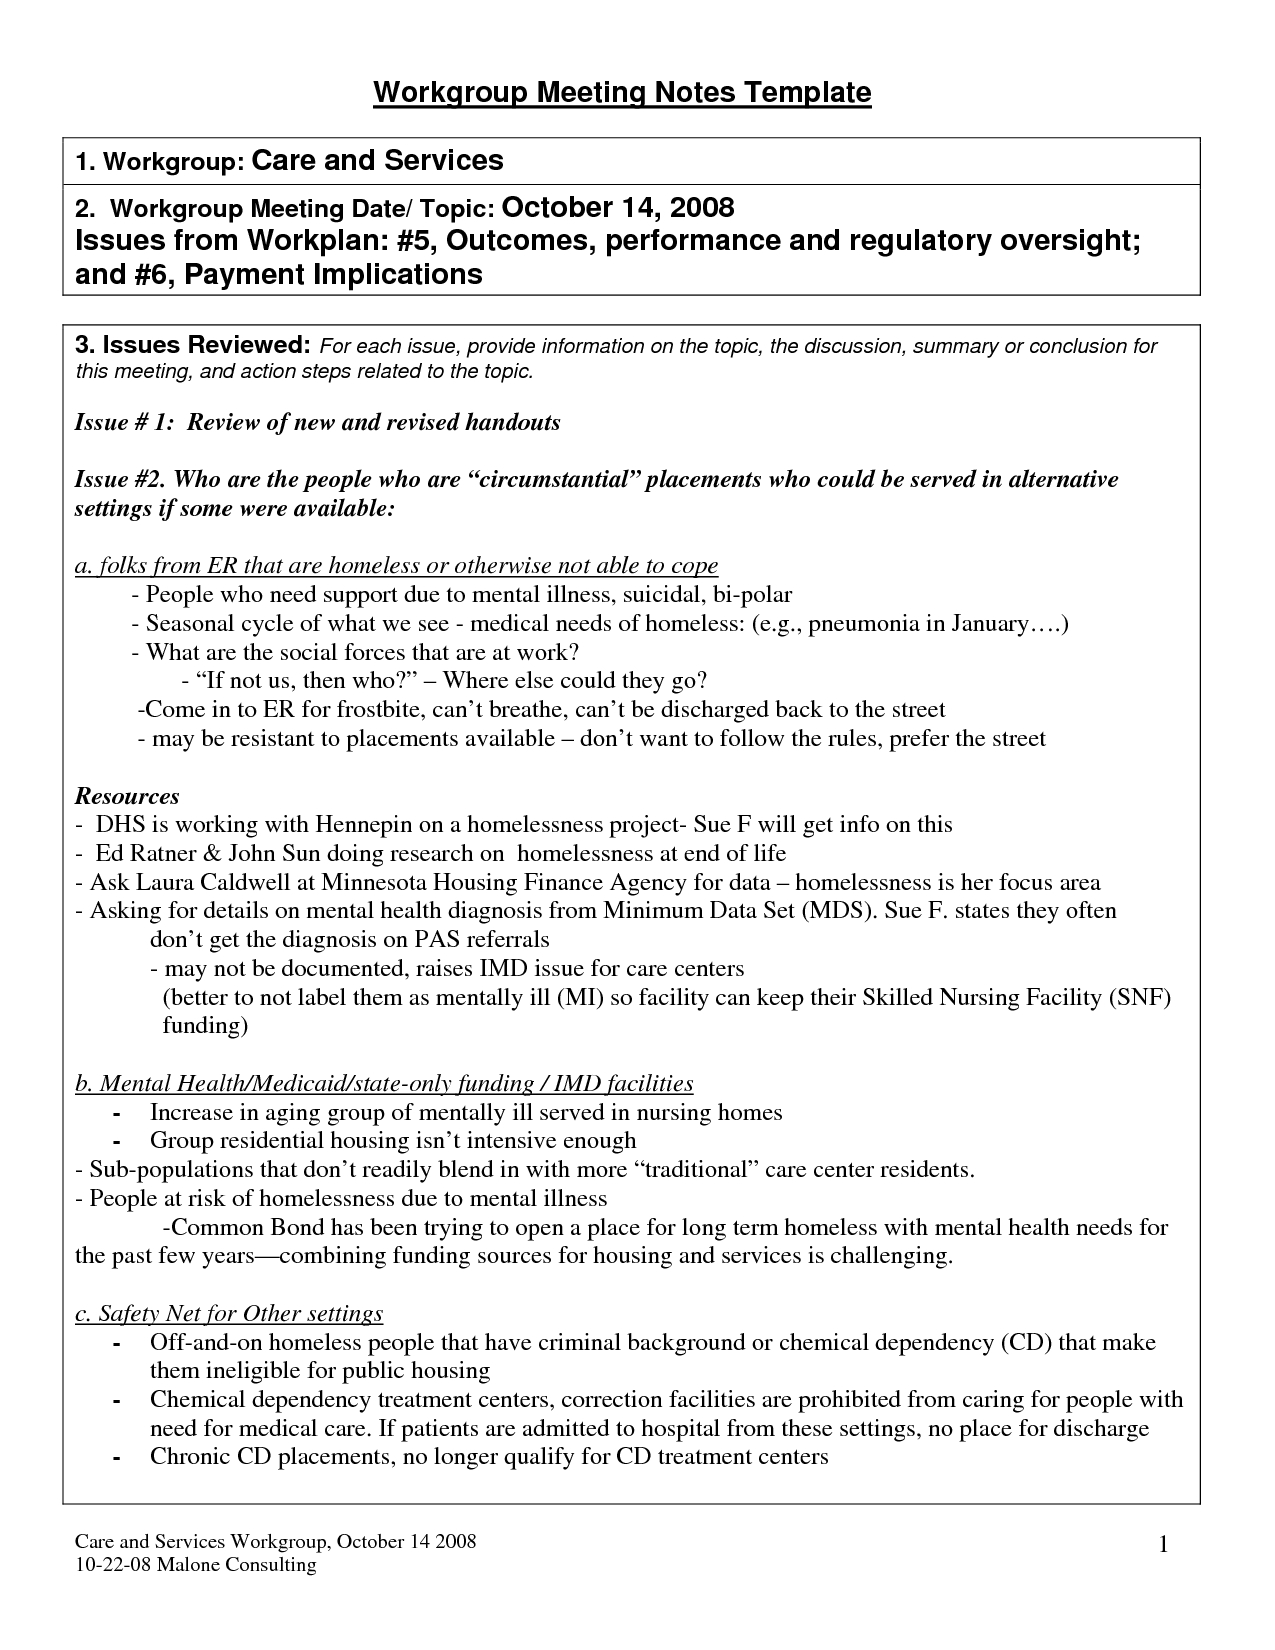 Meeting Summary Examples – Pdf | Examples Throughout Conference Summary Report Template